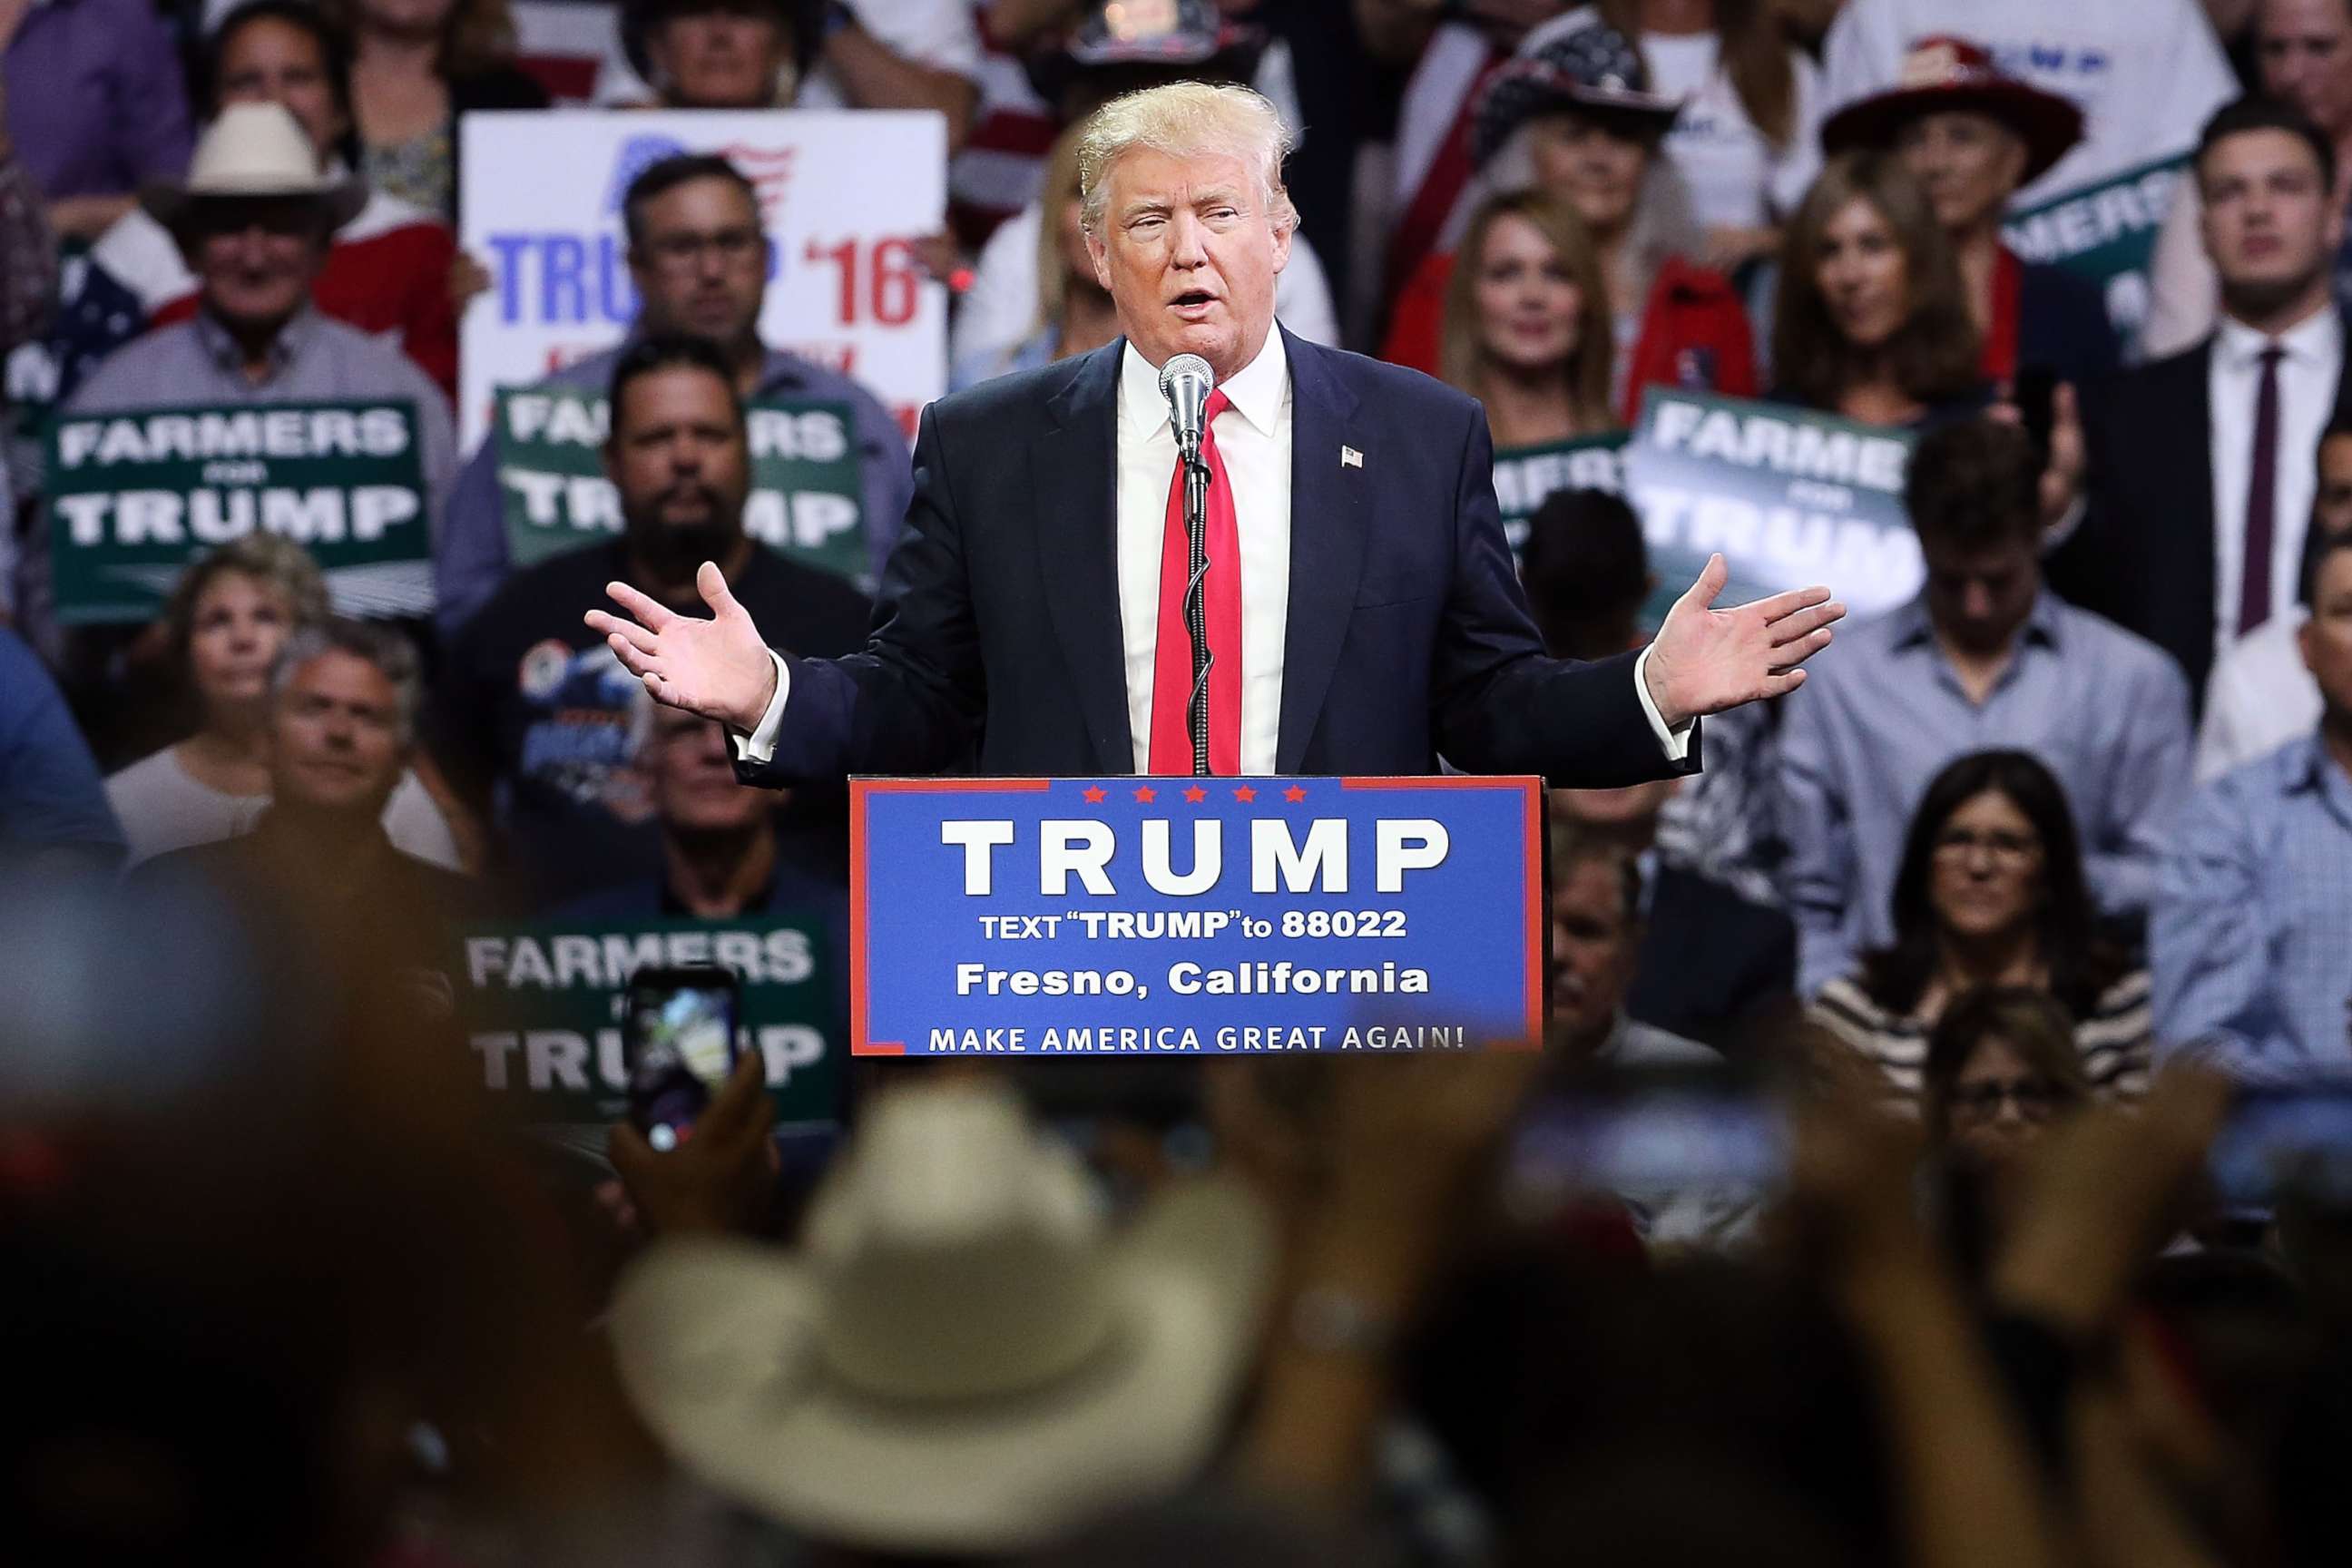 PHOTO: In this file photo, presumptive Republican presidential candidate Donald Trump speaks at a rally on May 27, 2016 in Fresno, Calif.